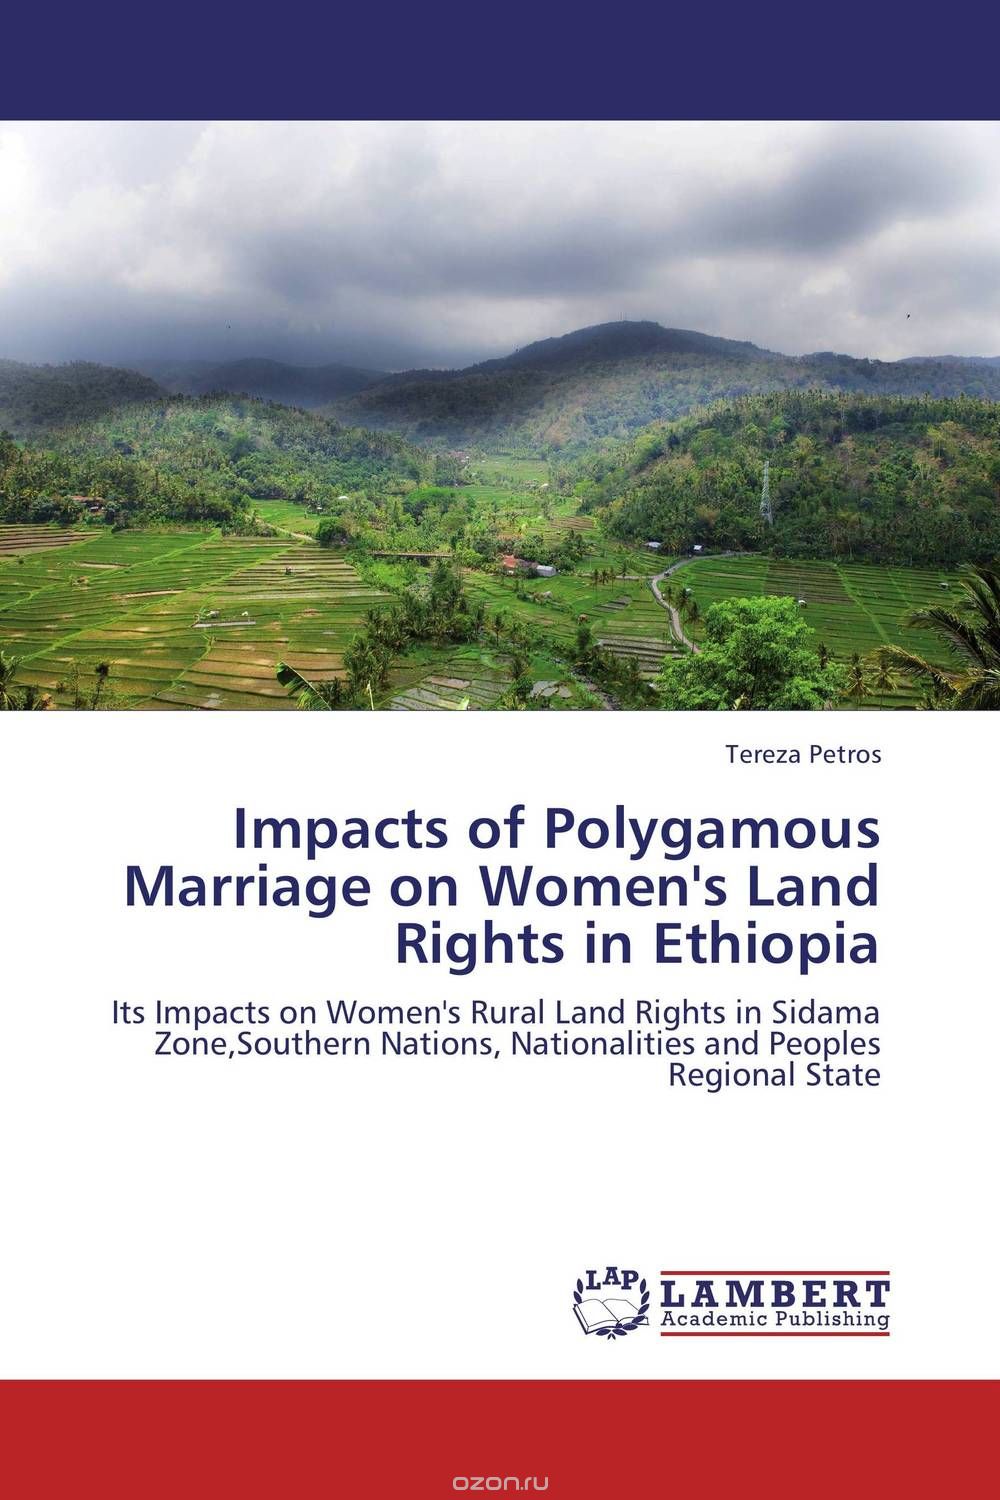 Impacts of Polygamous Marriage on Women's Land Rights in Ethiopia